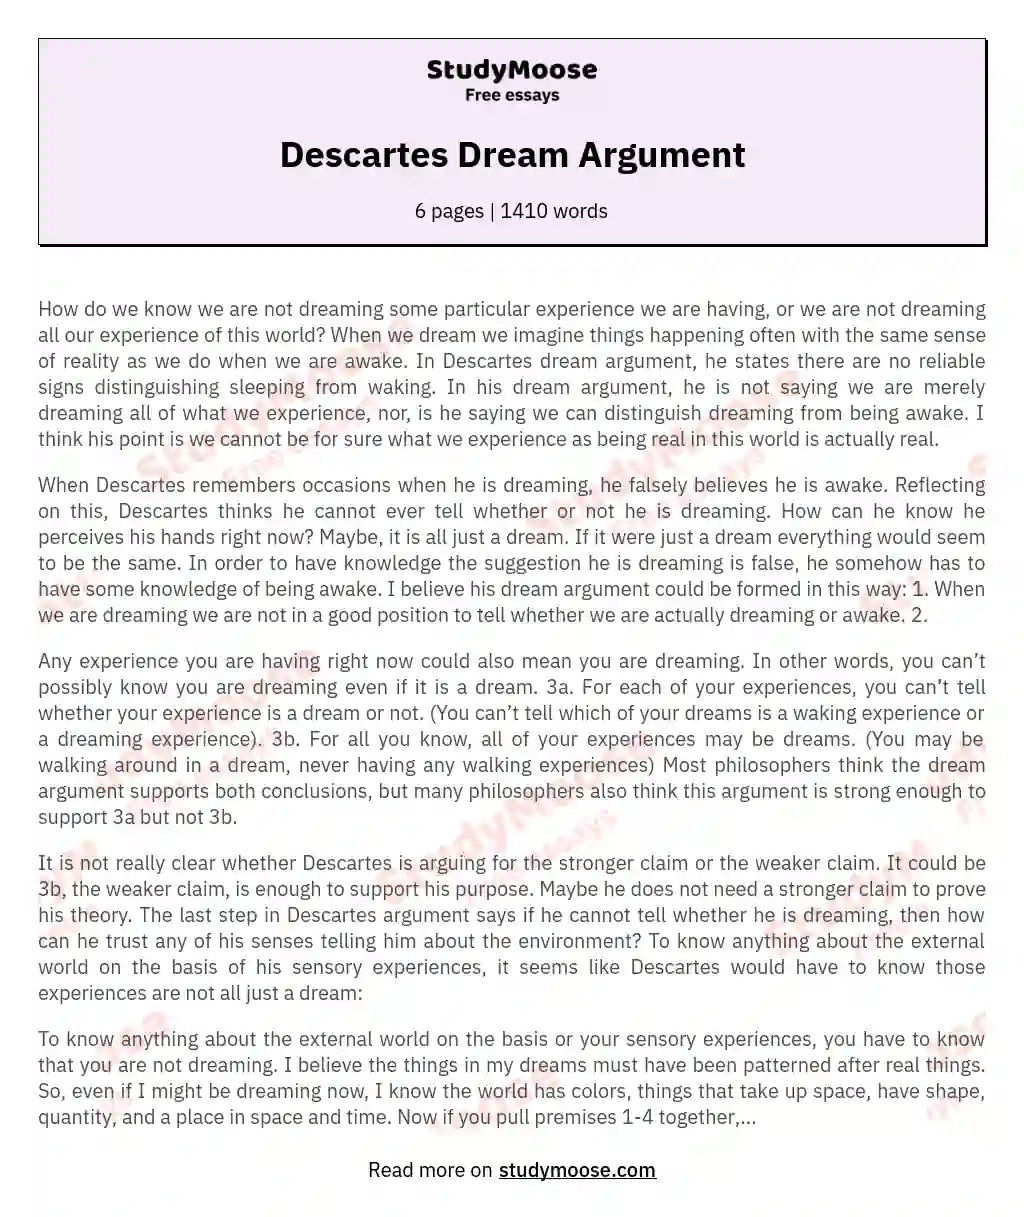 Descartes' Philosophical Odyssey on Certainty and Uncertainty essay